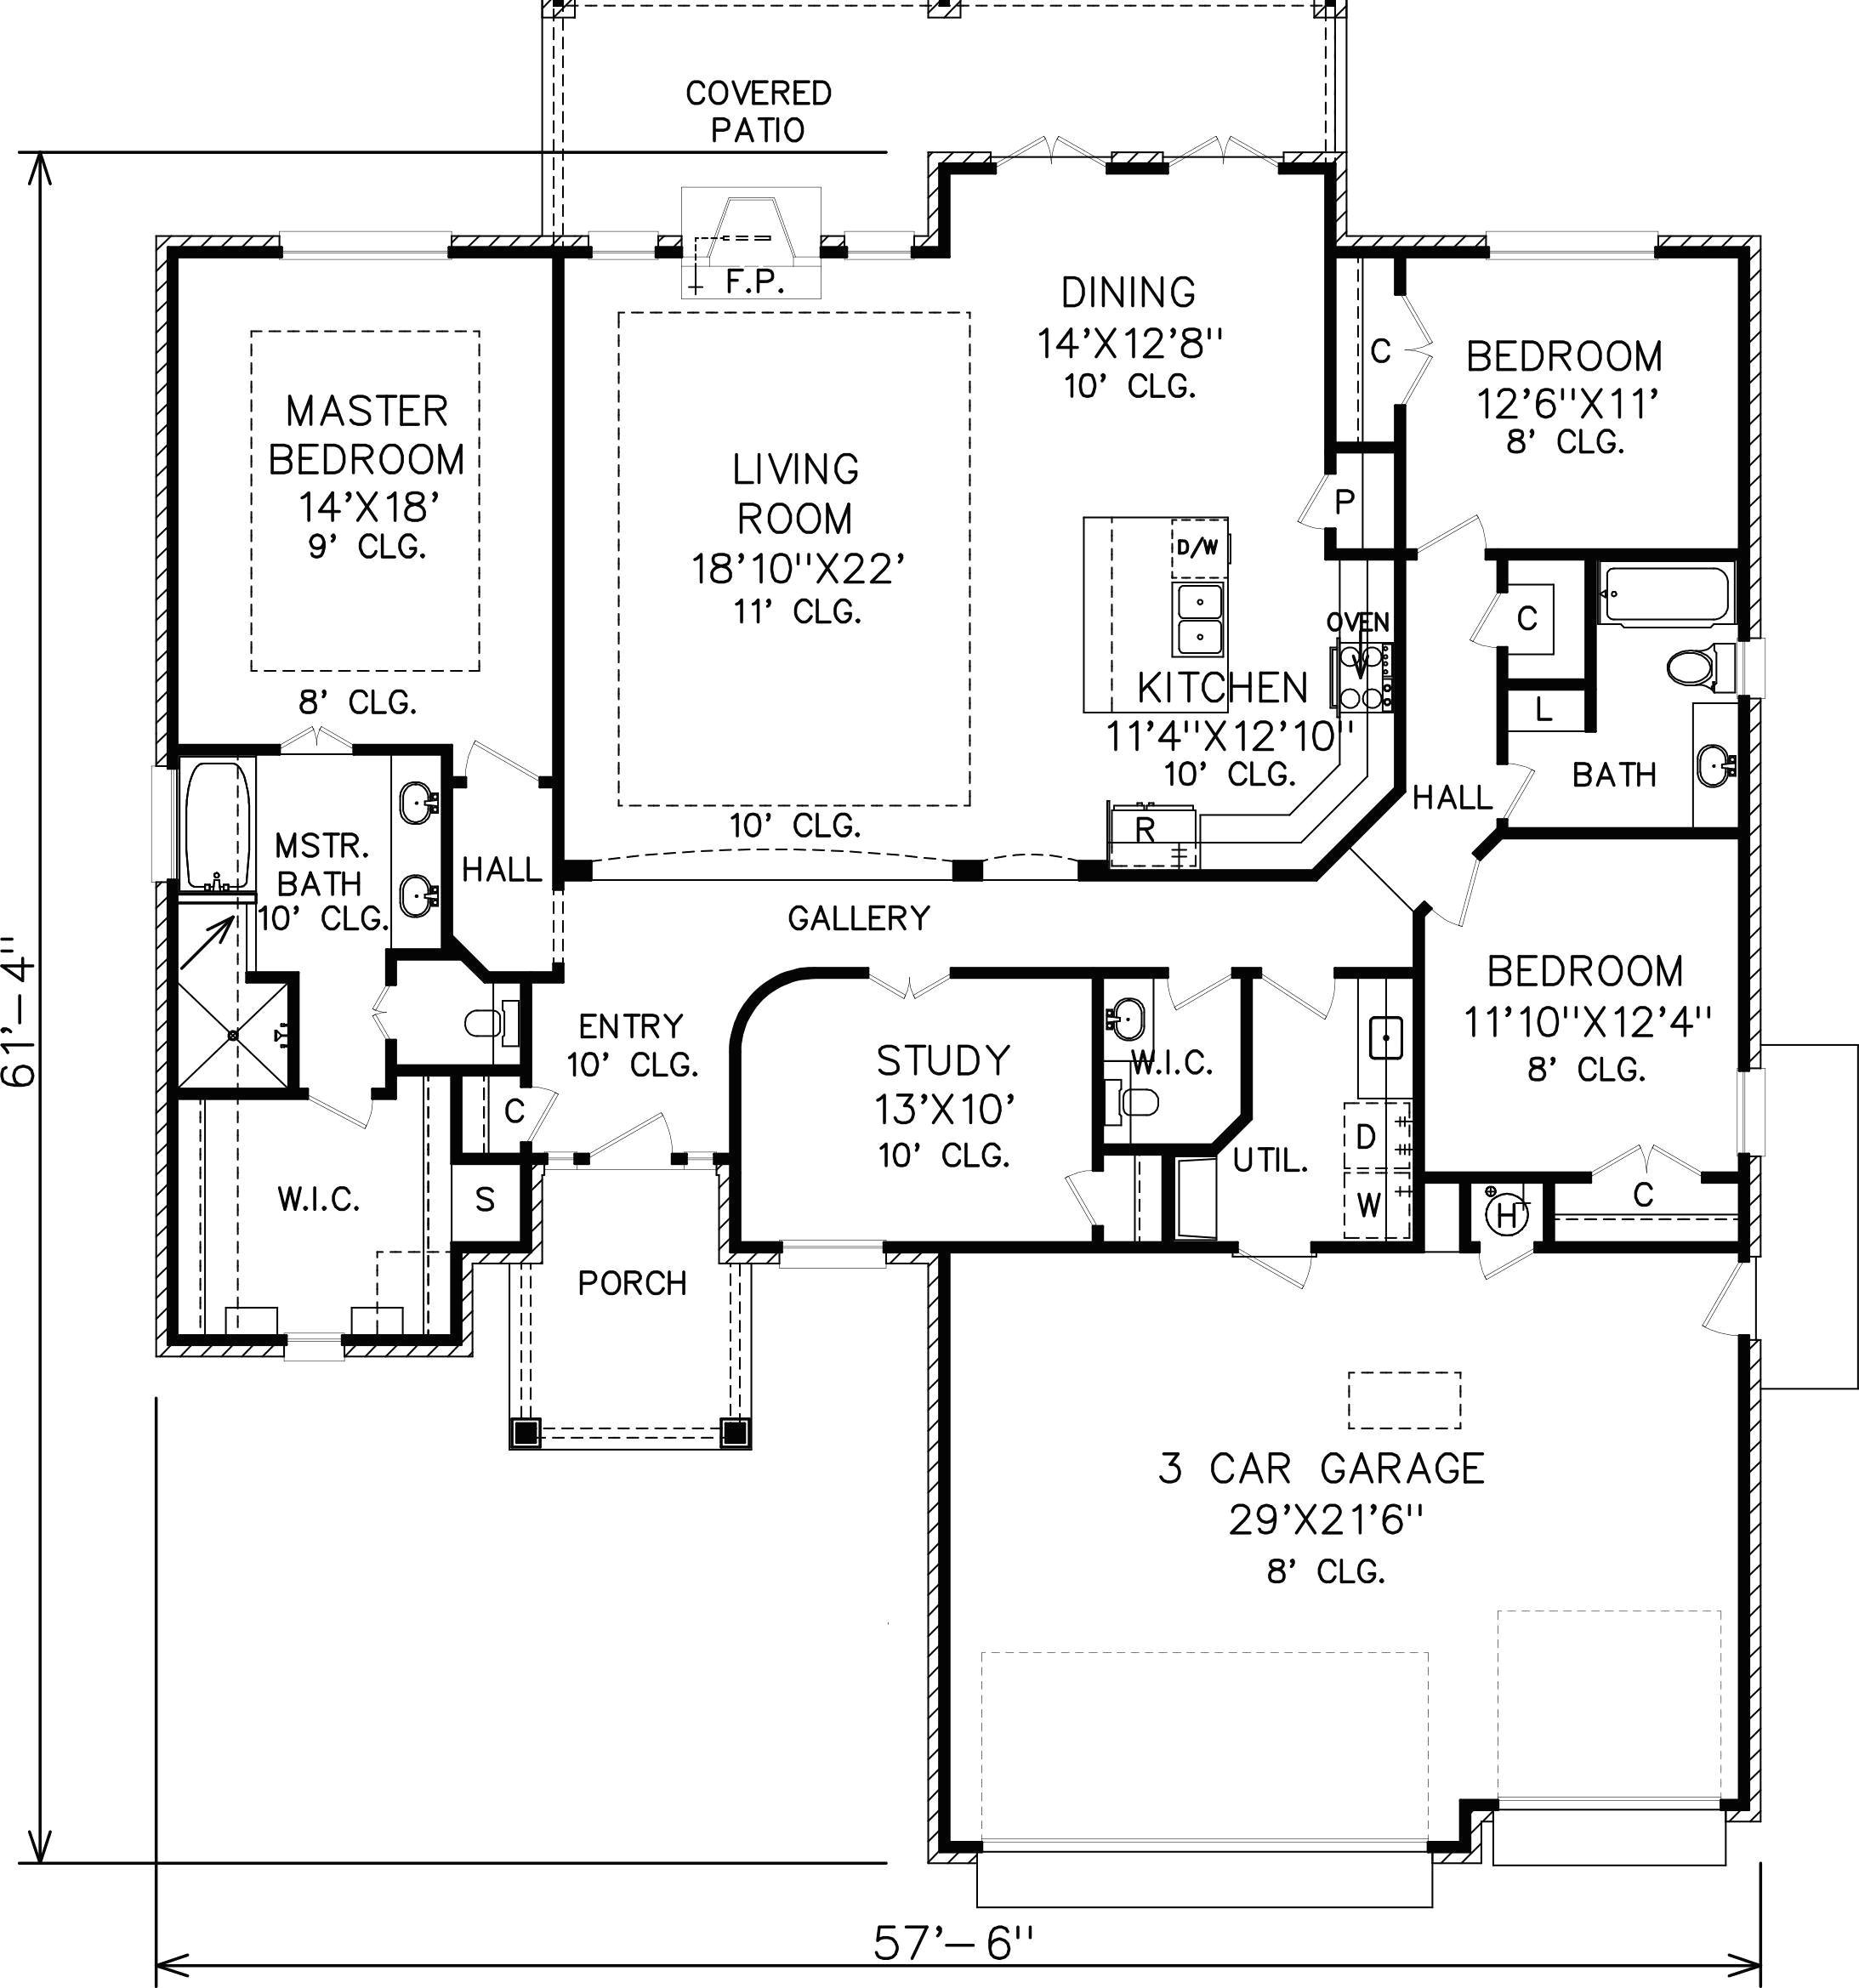 Drawing Of Heart House 34 Modern Floor Plan with Dimensions Ideas Floor Plan Design